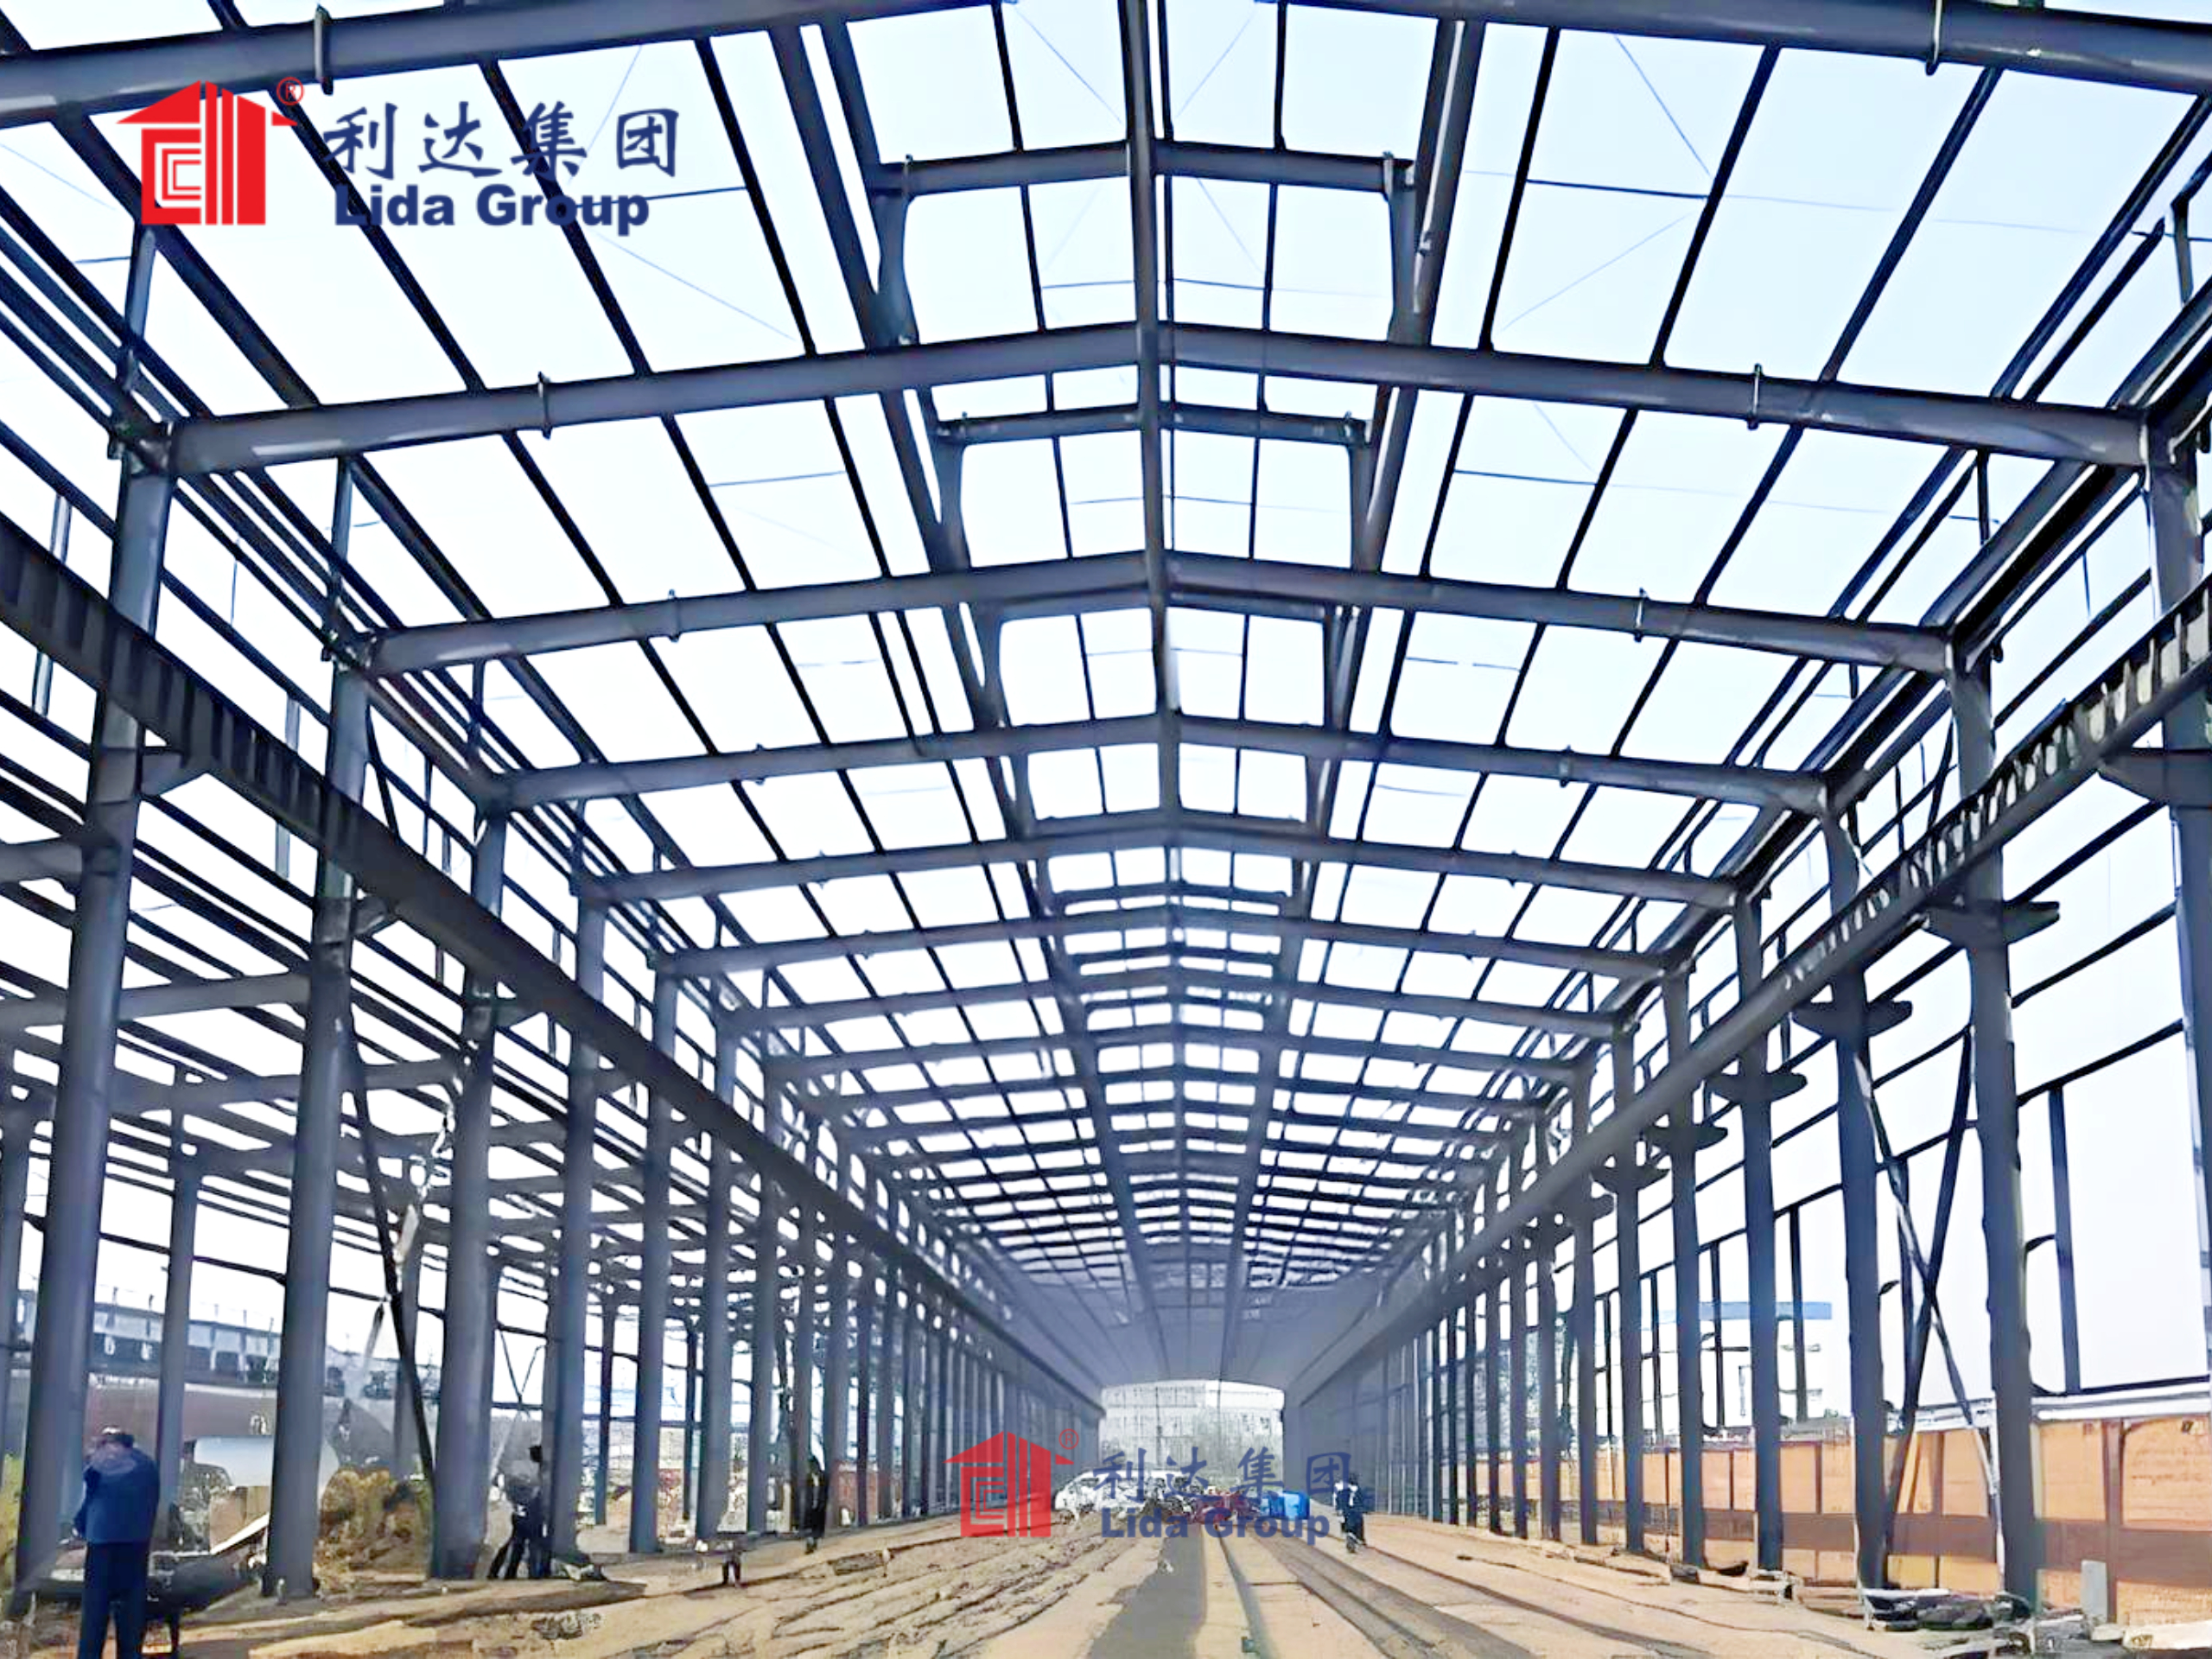 Technical paper analyzes the wind and weather resilience, structural longevity, and affordability of Lida Group's proprietary steel connections applied to economic farm warehouses and covered work areas.